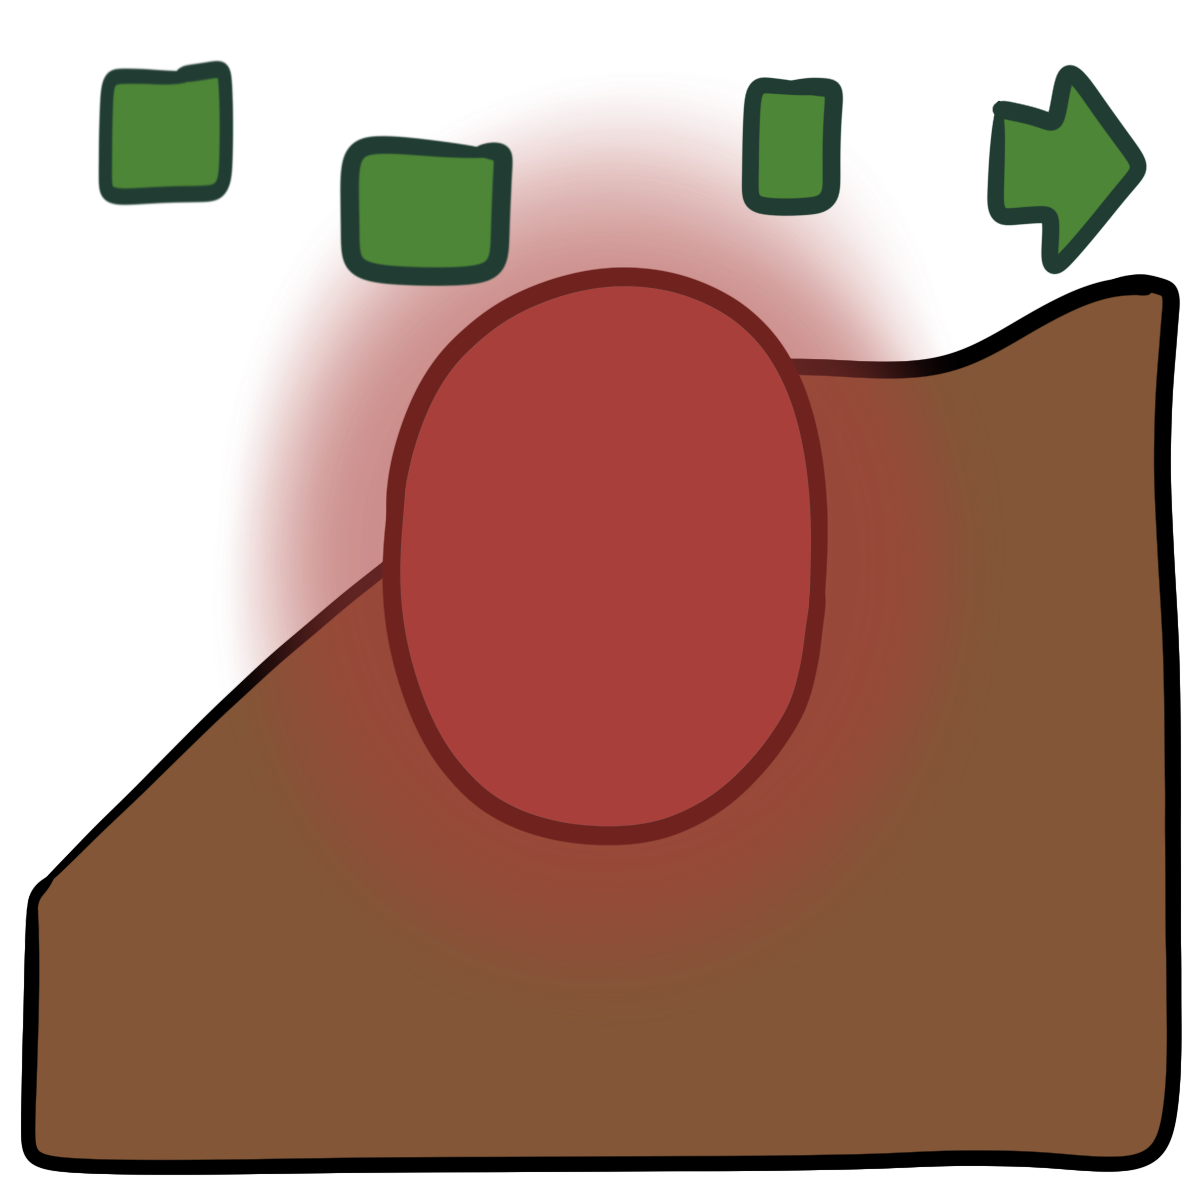 A green arrow pointing right is broken into four offset sections with large gaps between them. There is a red glowing oval in the center. Curved medium brown skin fills the bottom half of the background.